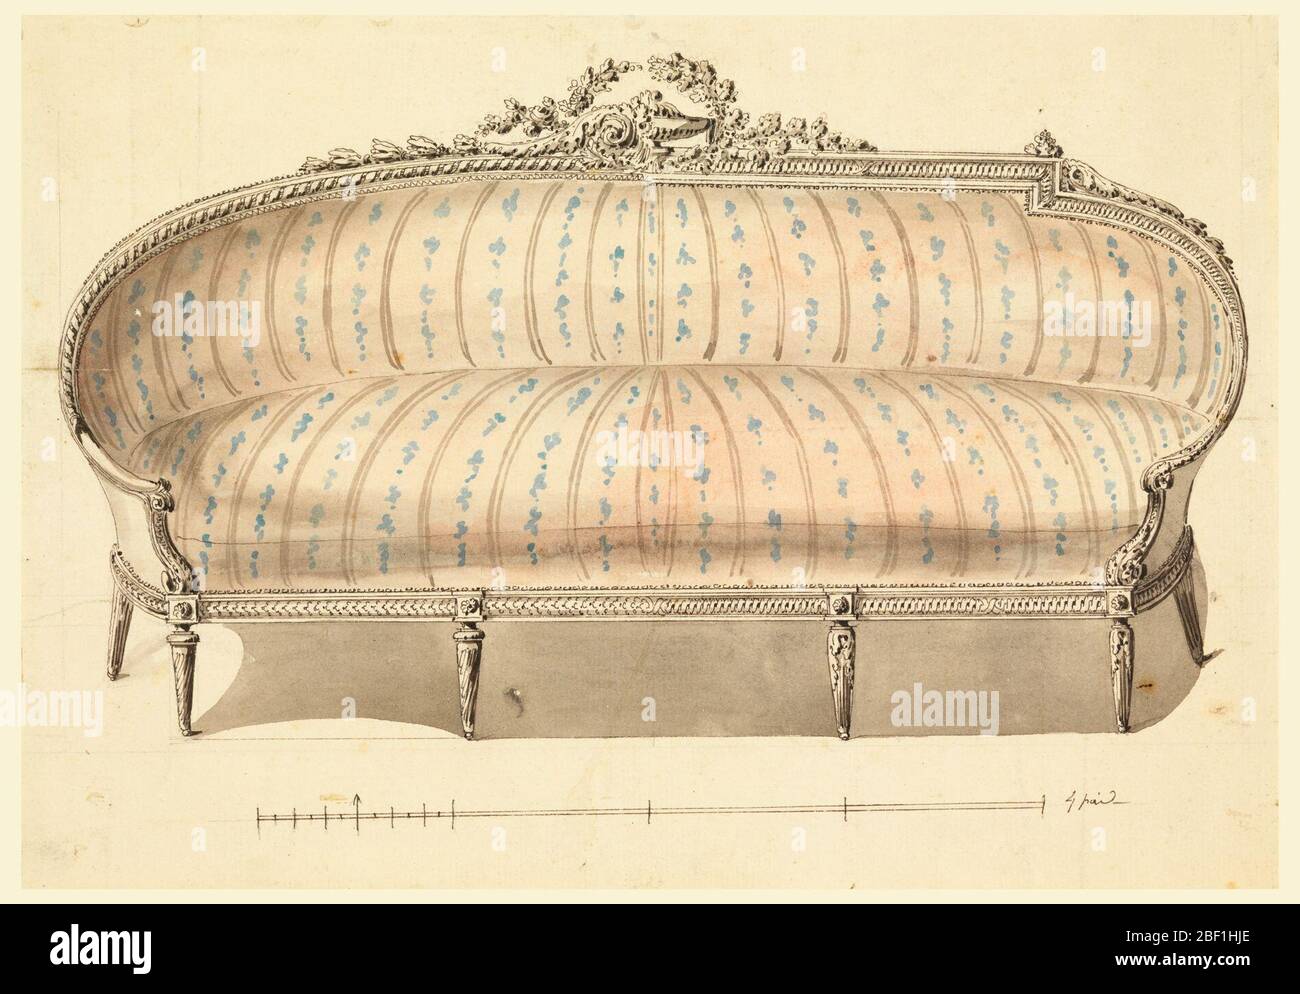 Design for Sofa with Alternative Suggestions. Sofa design in Louis XIV  style. Alternative decoration at top rail shows a cornucopia and beading at  left, urn and floral design at right. The legs